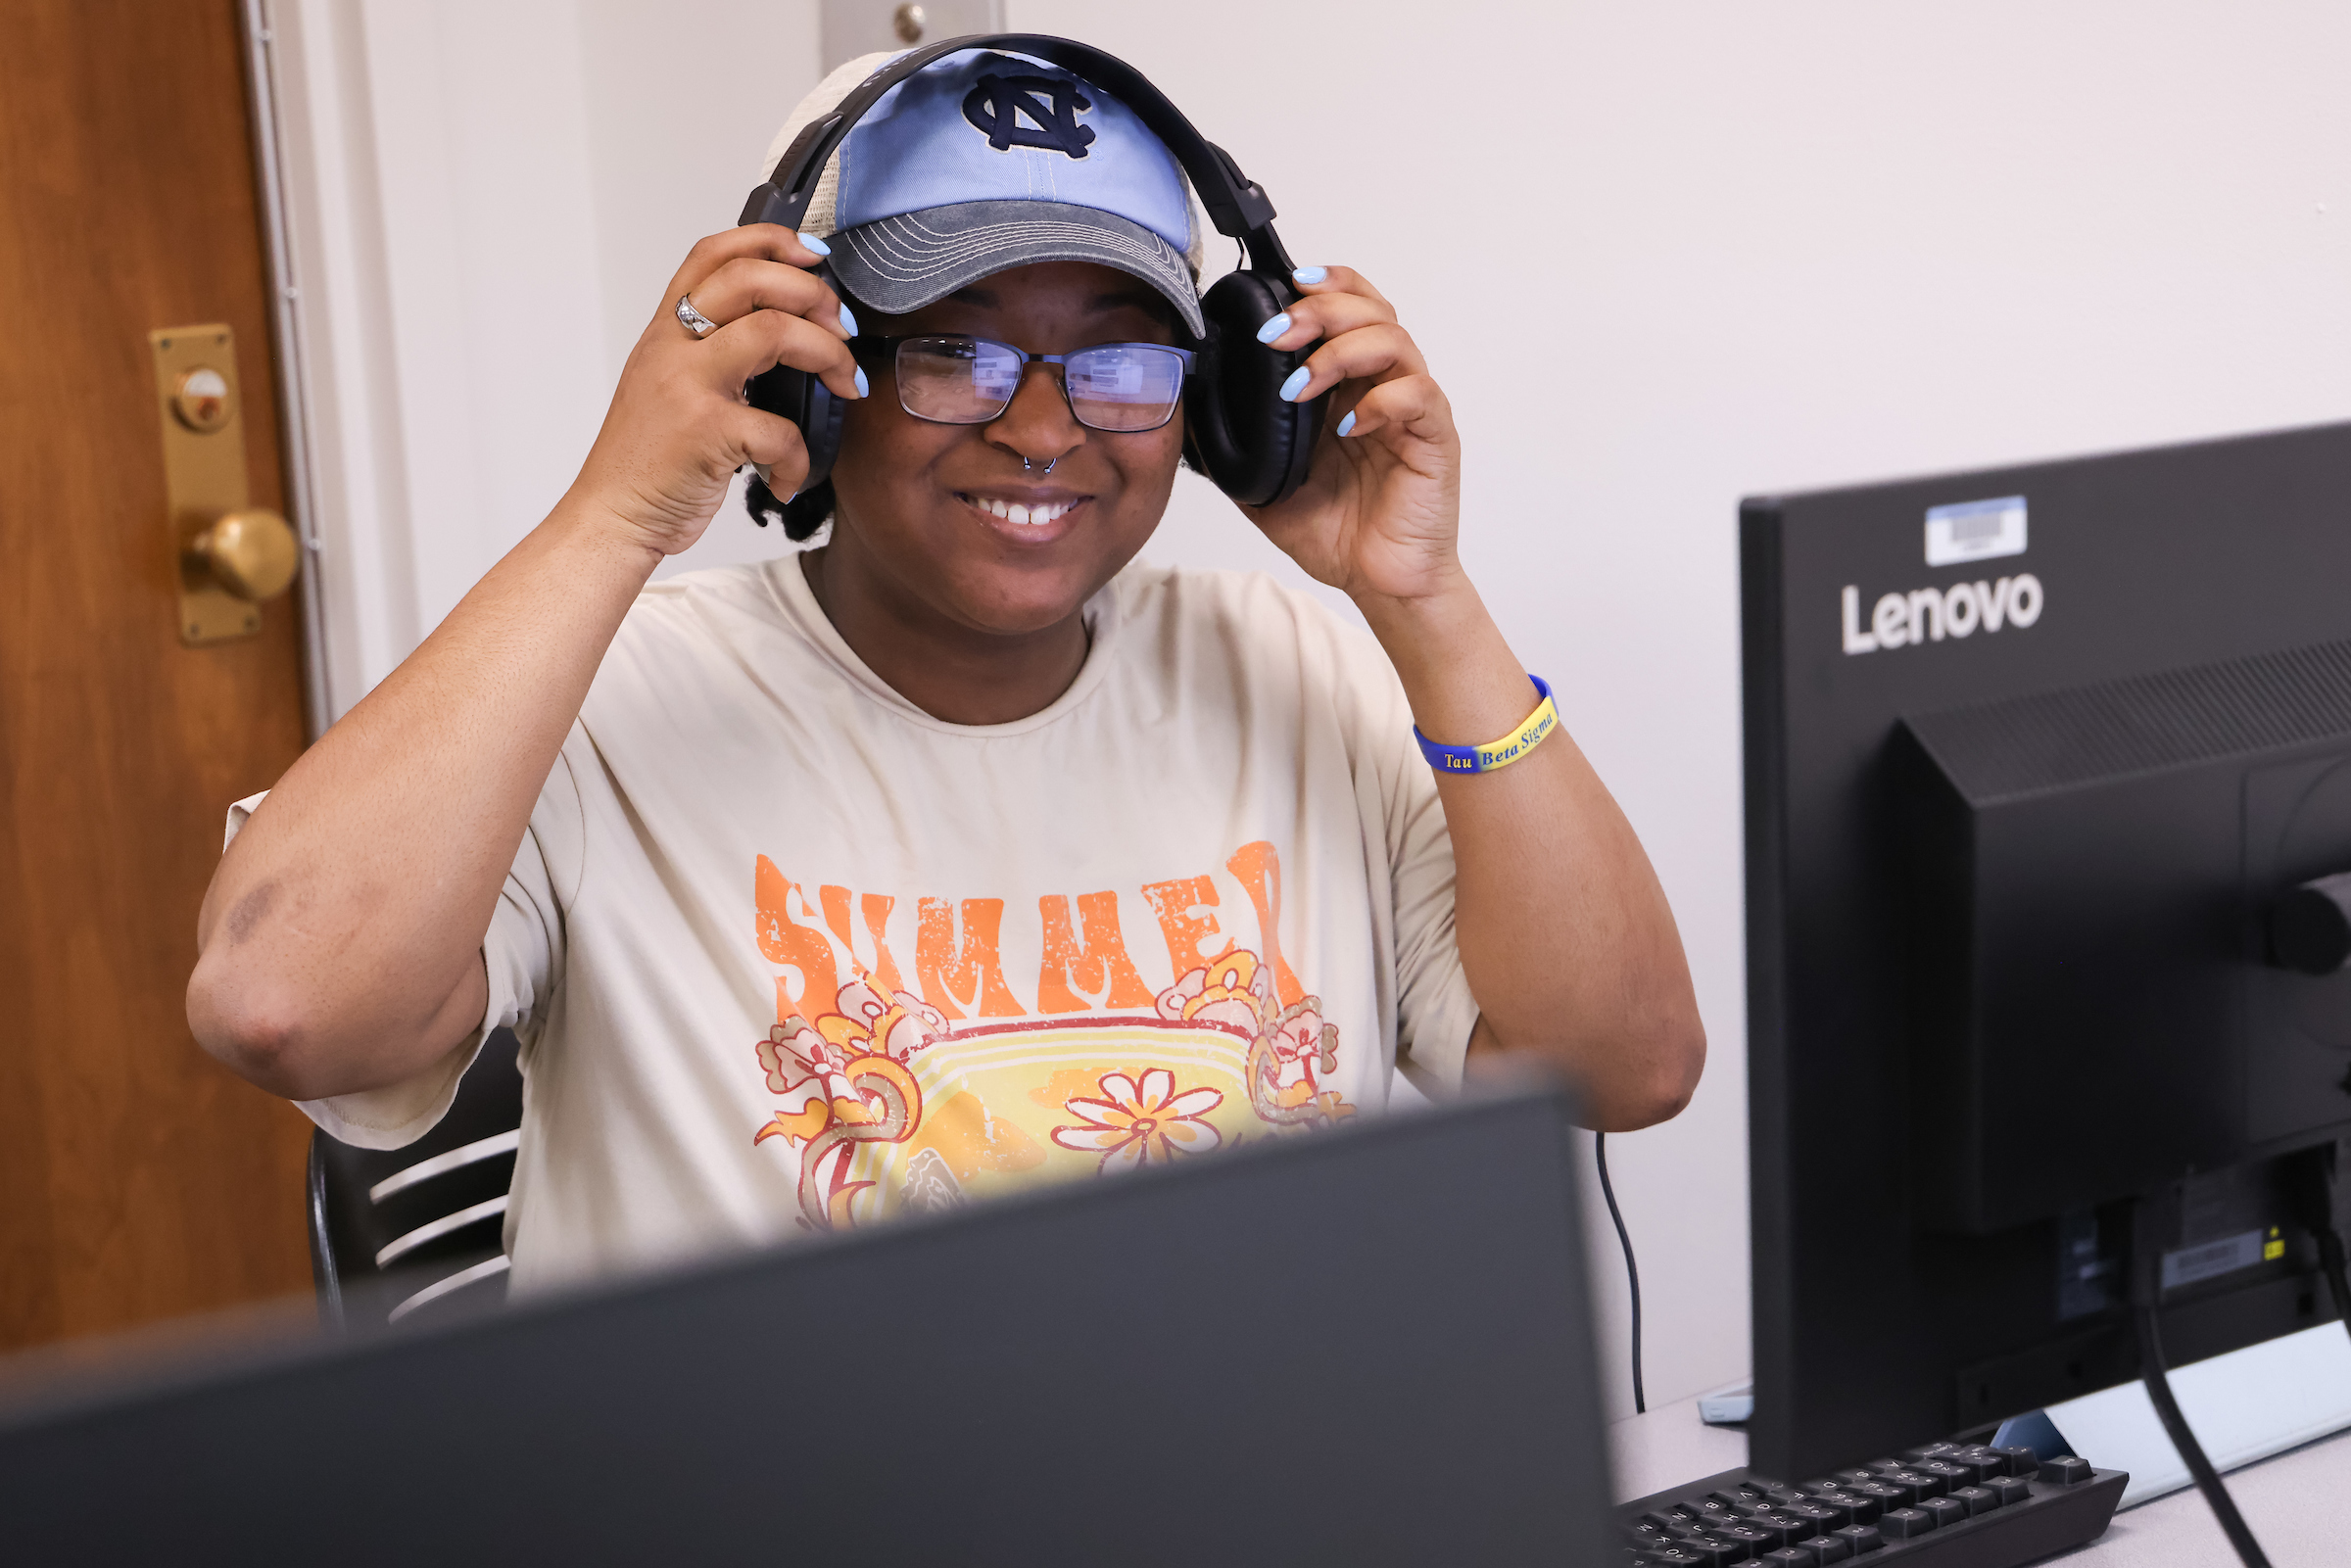 student wearing headphones smiles at the camera, sitting in front of a computer